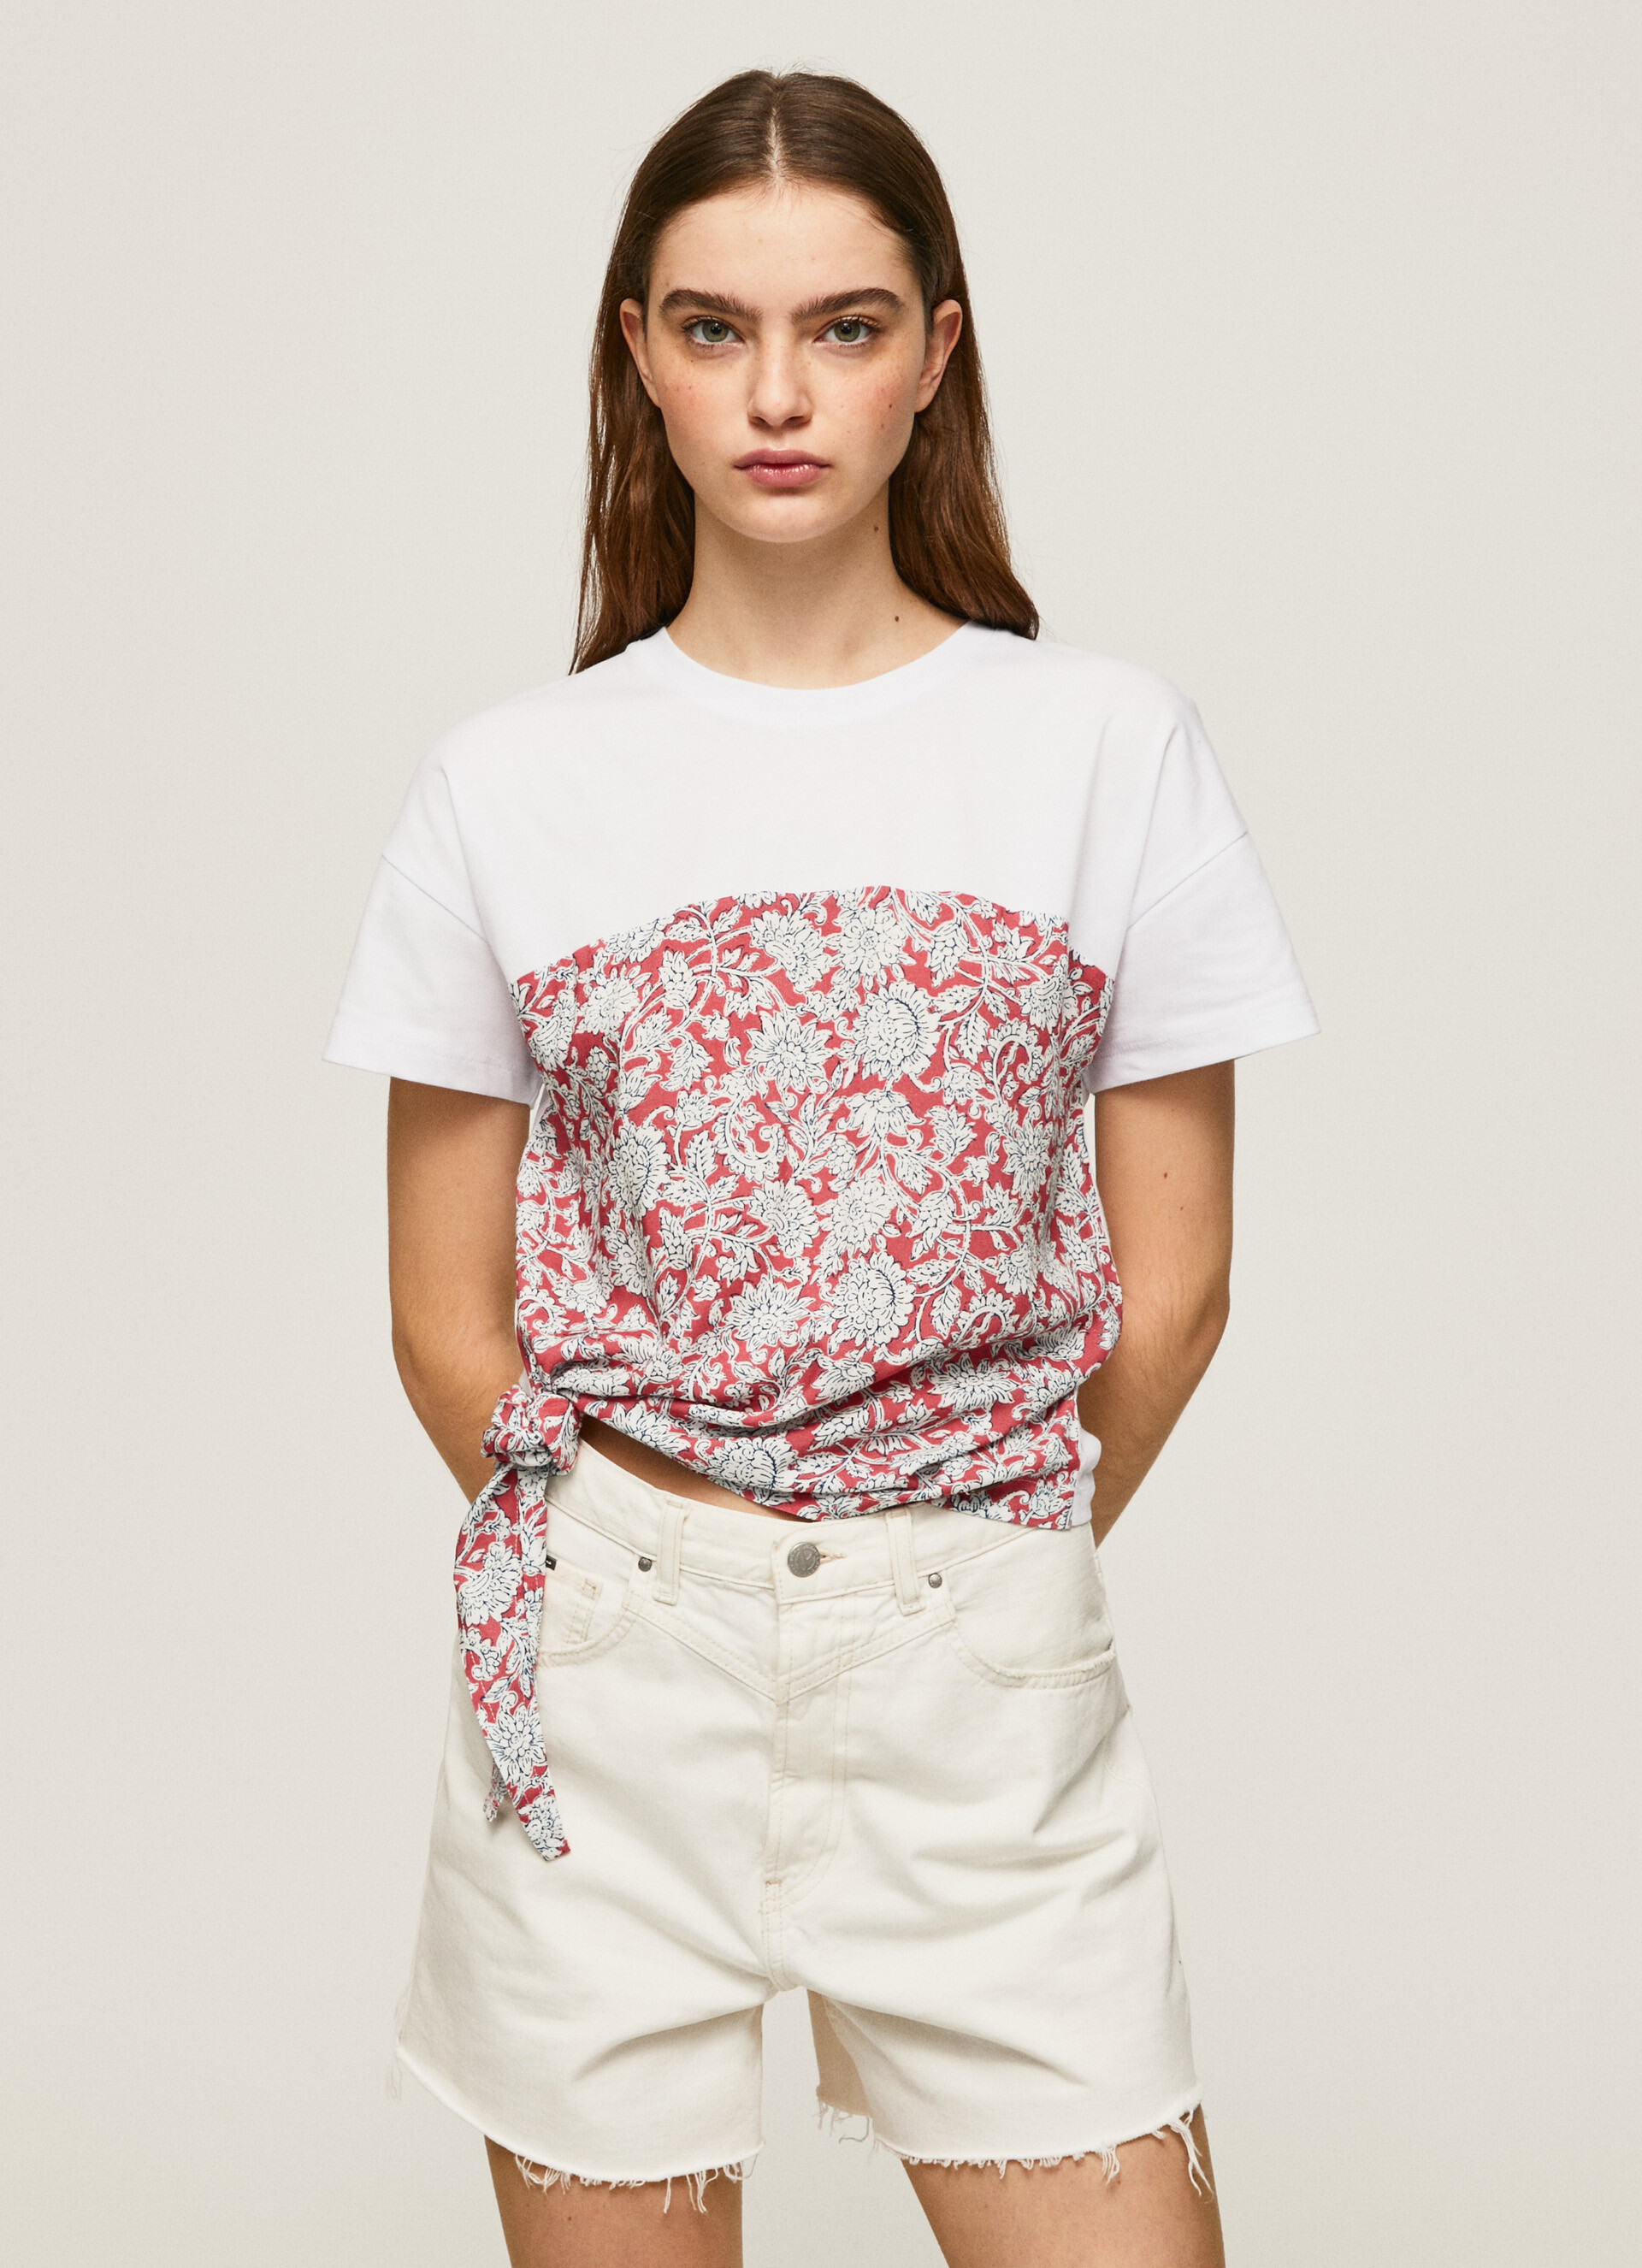 Pepe Jeans - Patterned cotton T-shirt, Red, large image number 3